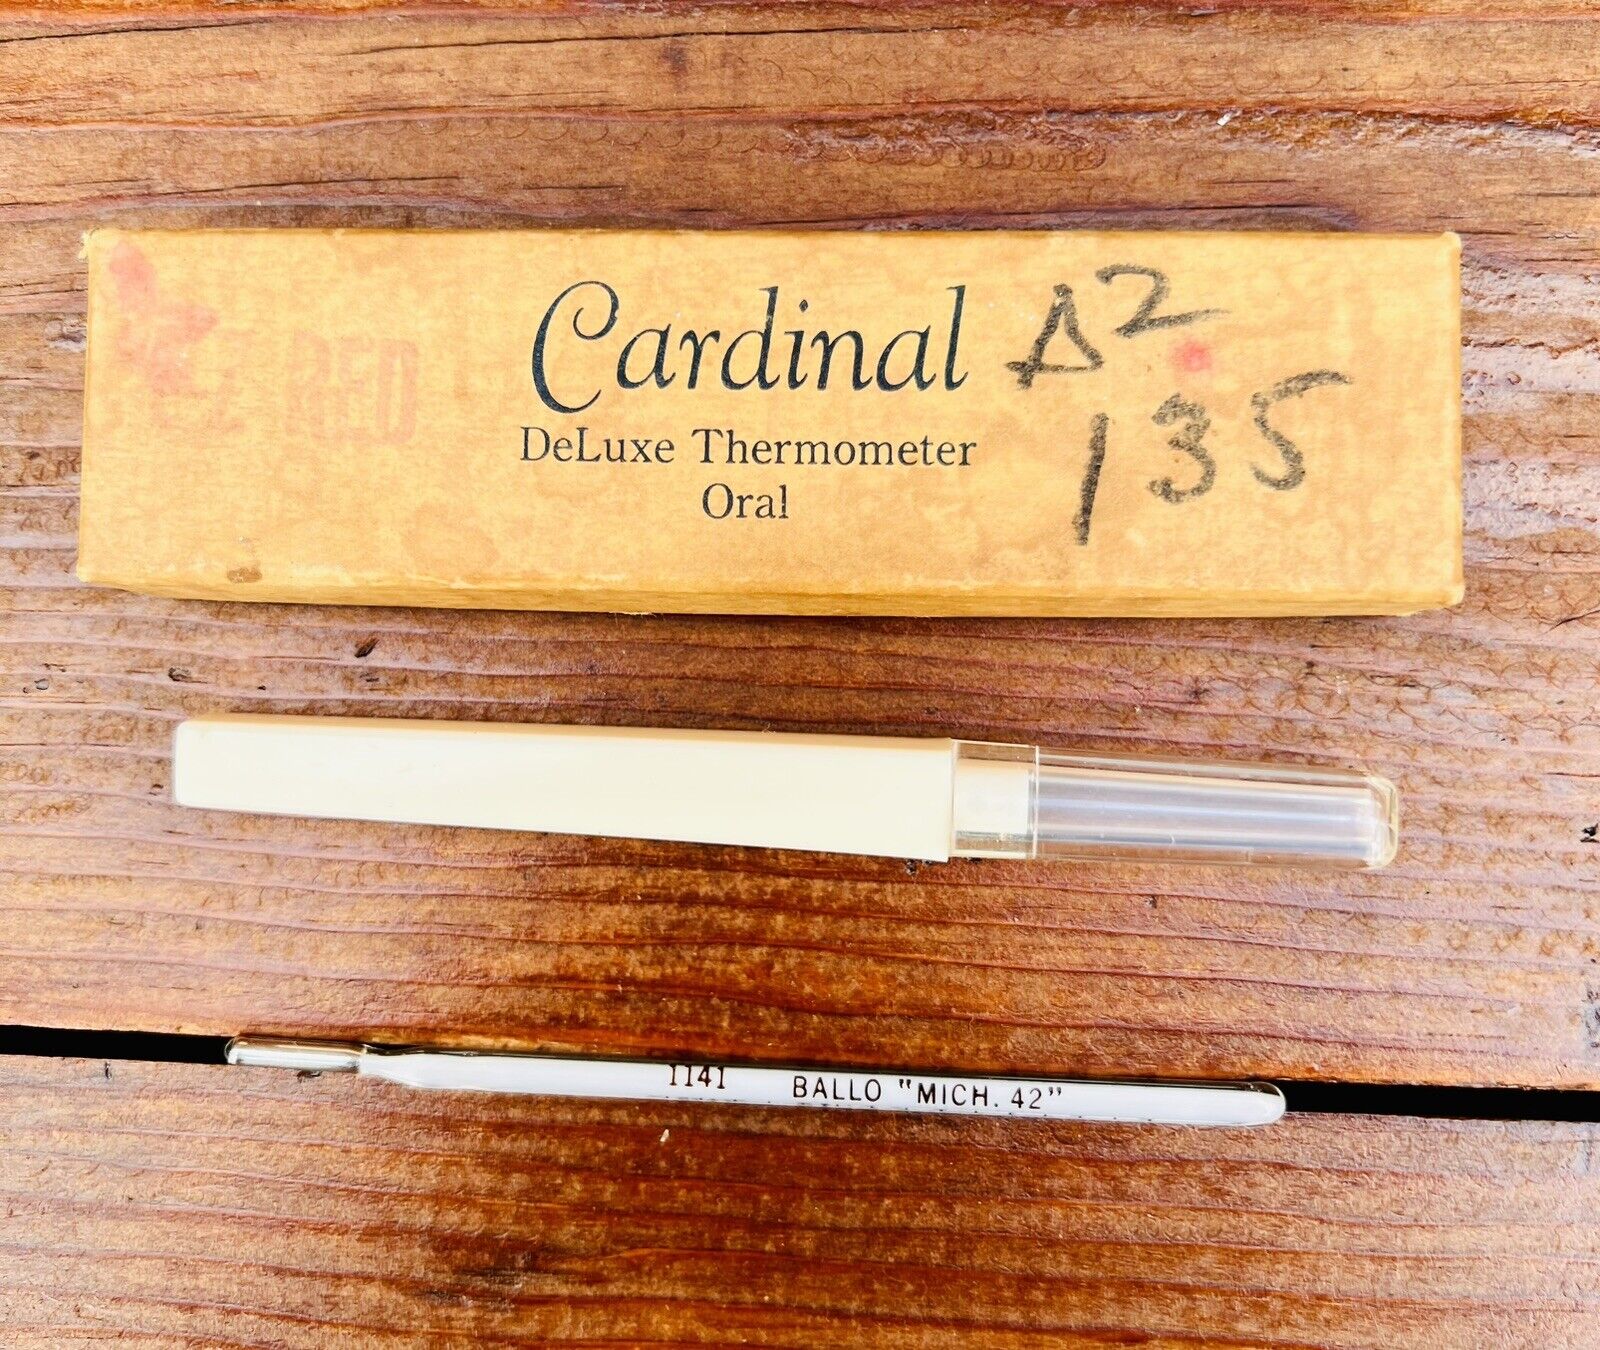 Vintage Cardinal Deluxe Medical Thermometer Ballo Mich 42”